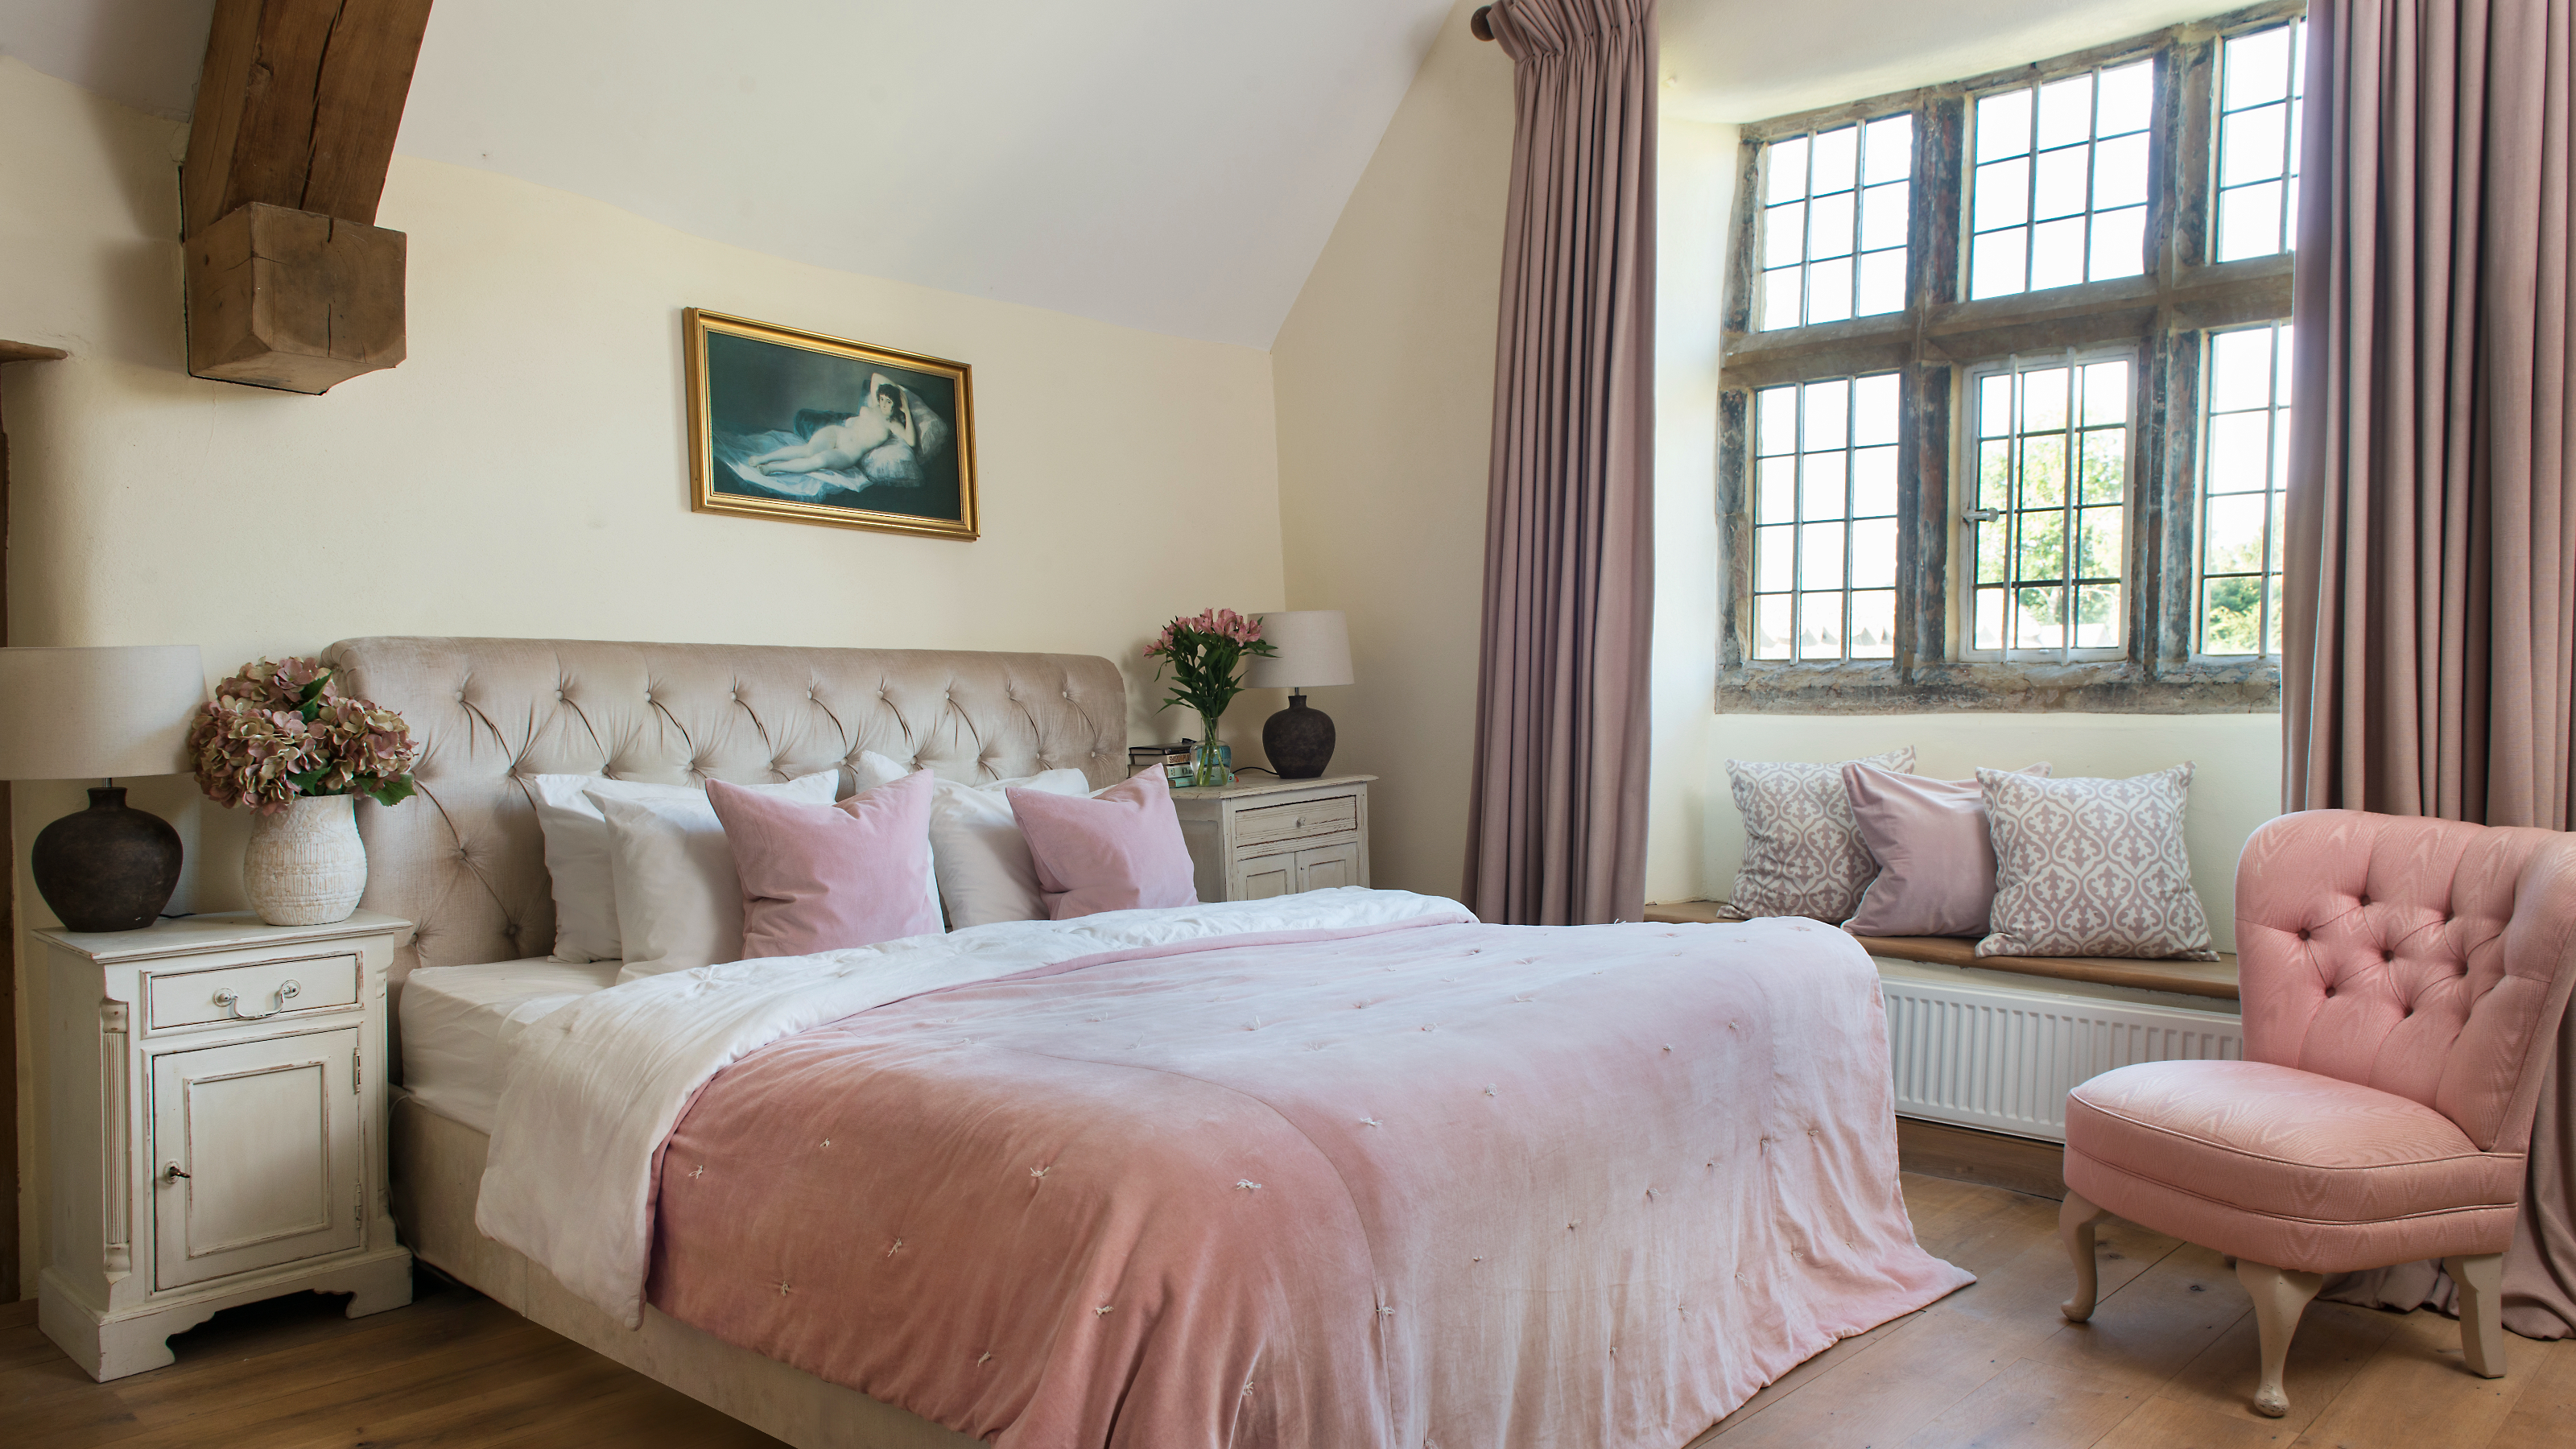 Grey and pink bedroom ideas - 10 ways to pull off this beautiful pairing